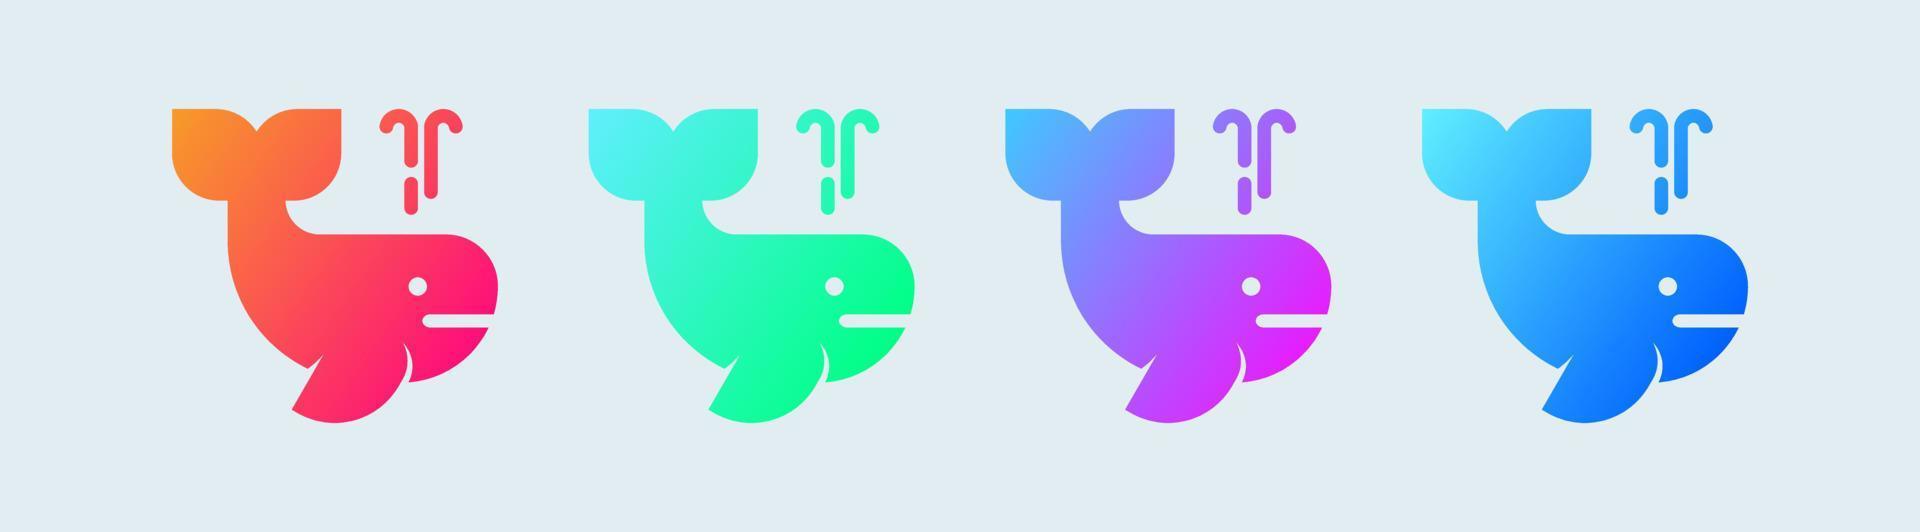 Whale solid icon in gradient colors. Ocean wildlife signs vector illustration.